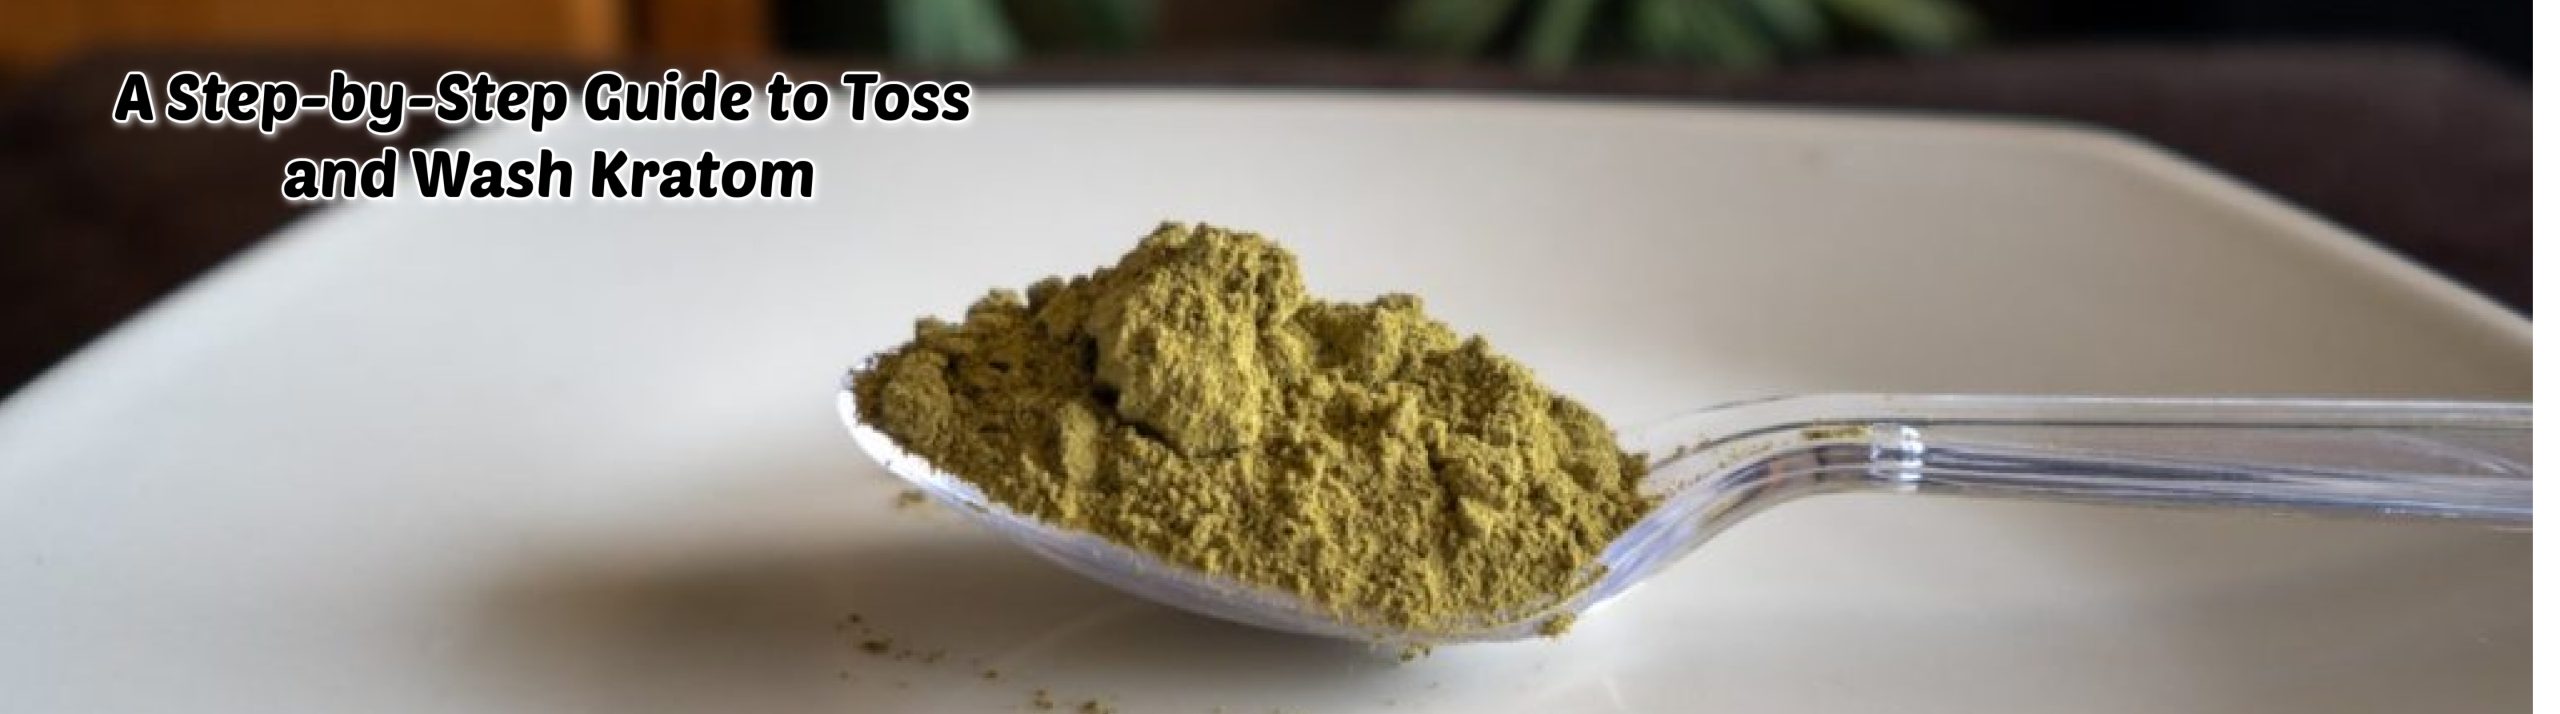 image of step by step guide to toss and wash kratom